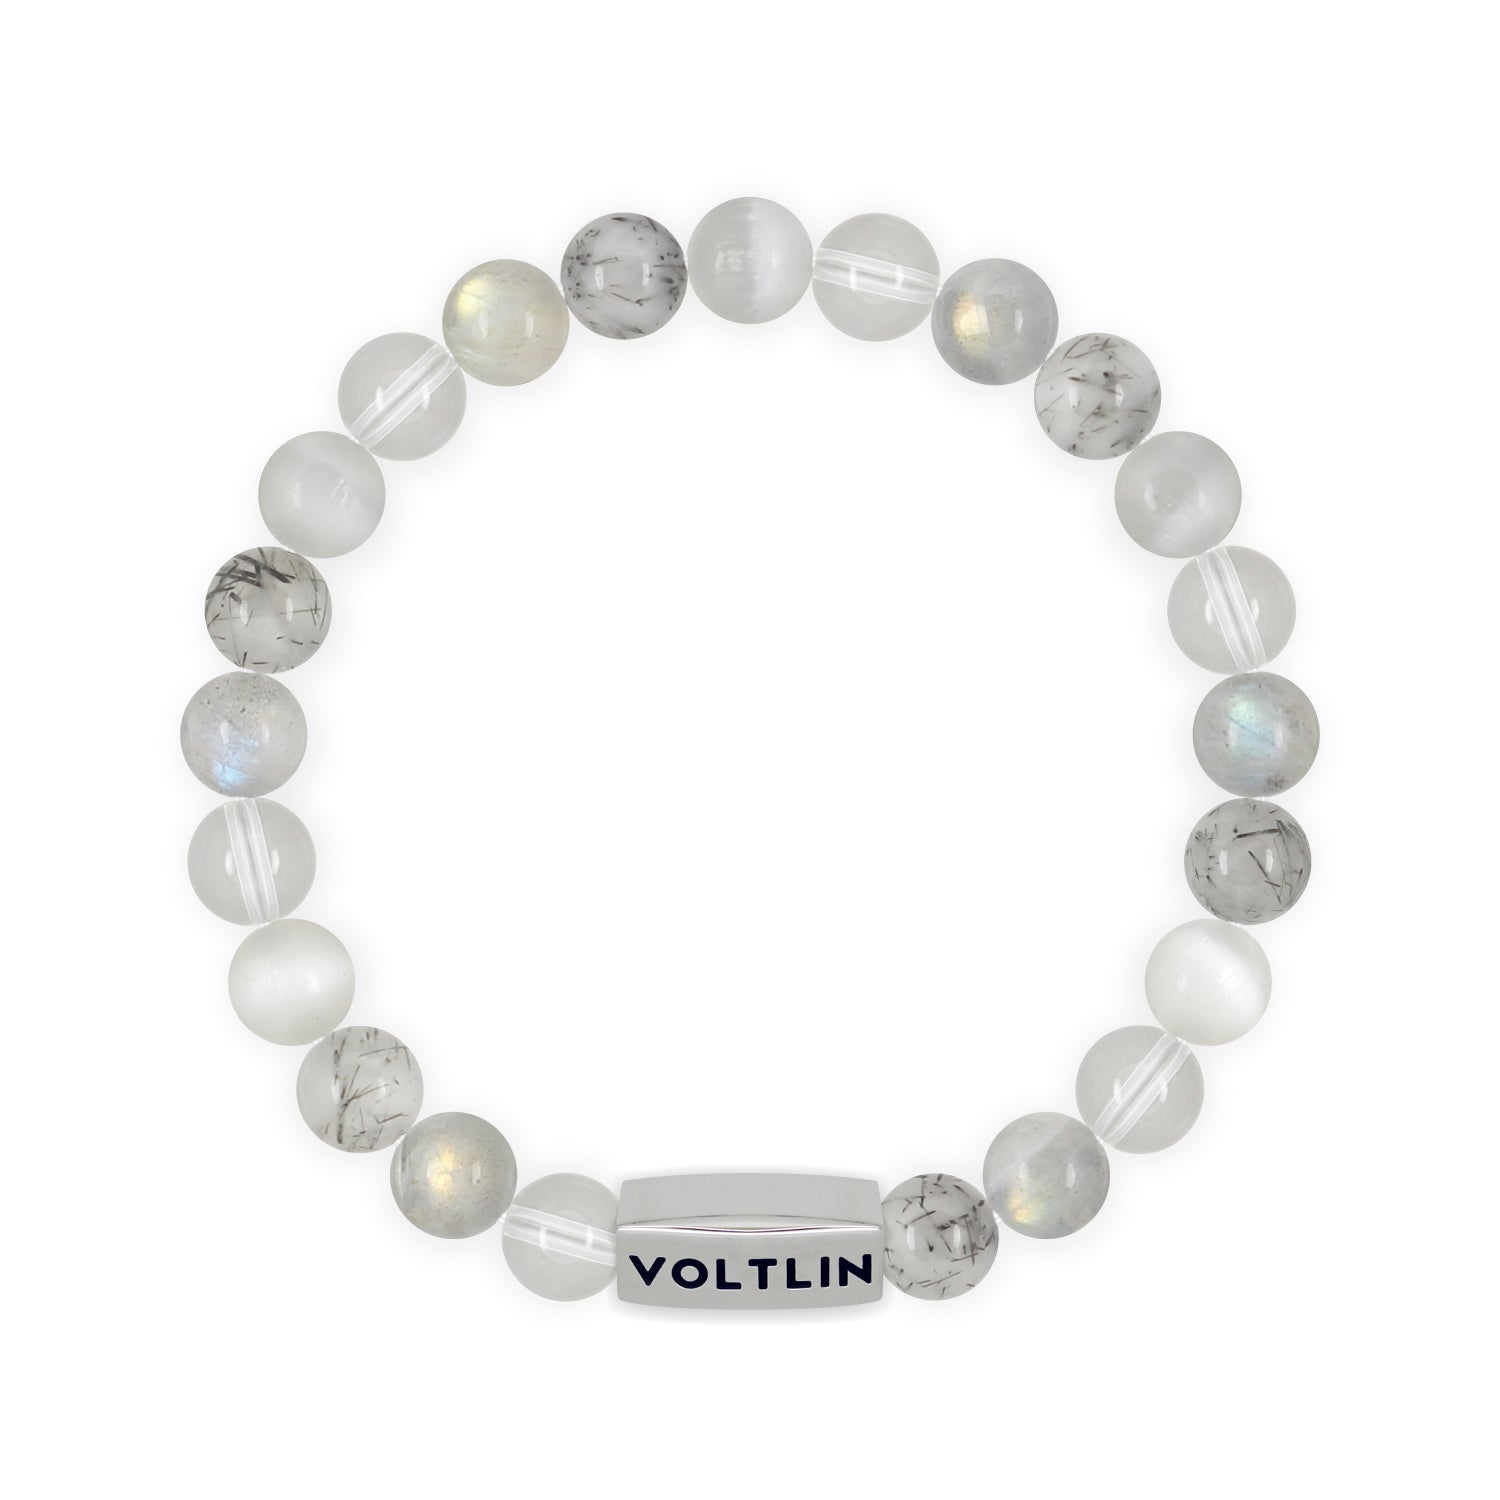 Front view of an 8mm Crown Chakra beaded stretch bracelet featuring Quartz, Labradorite, Tourmalinated Quartz, & Selenite crystal and silver stainless steel logo bead made by Voltlin